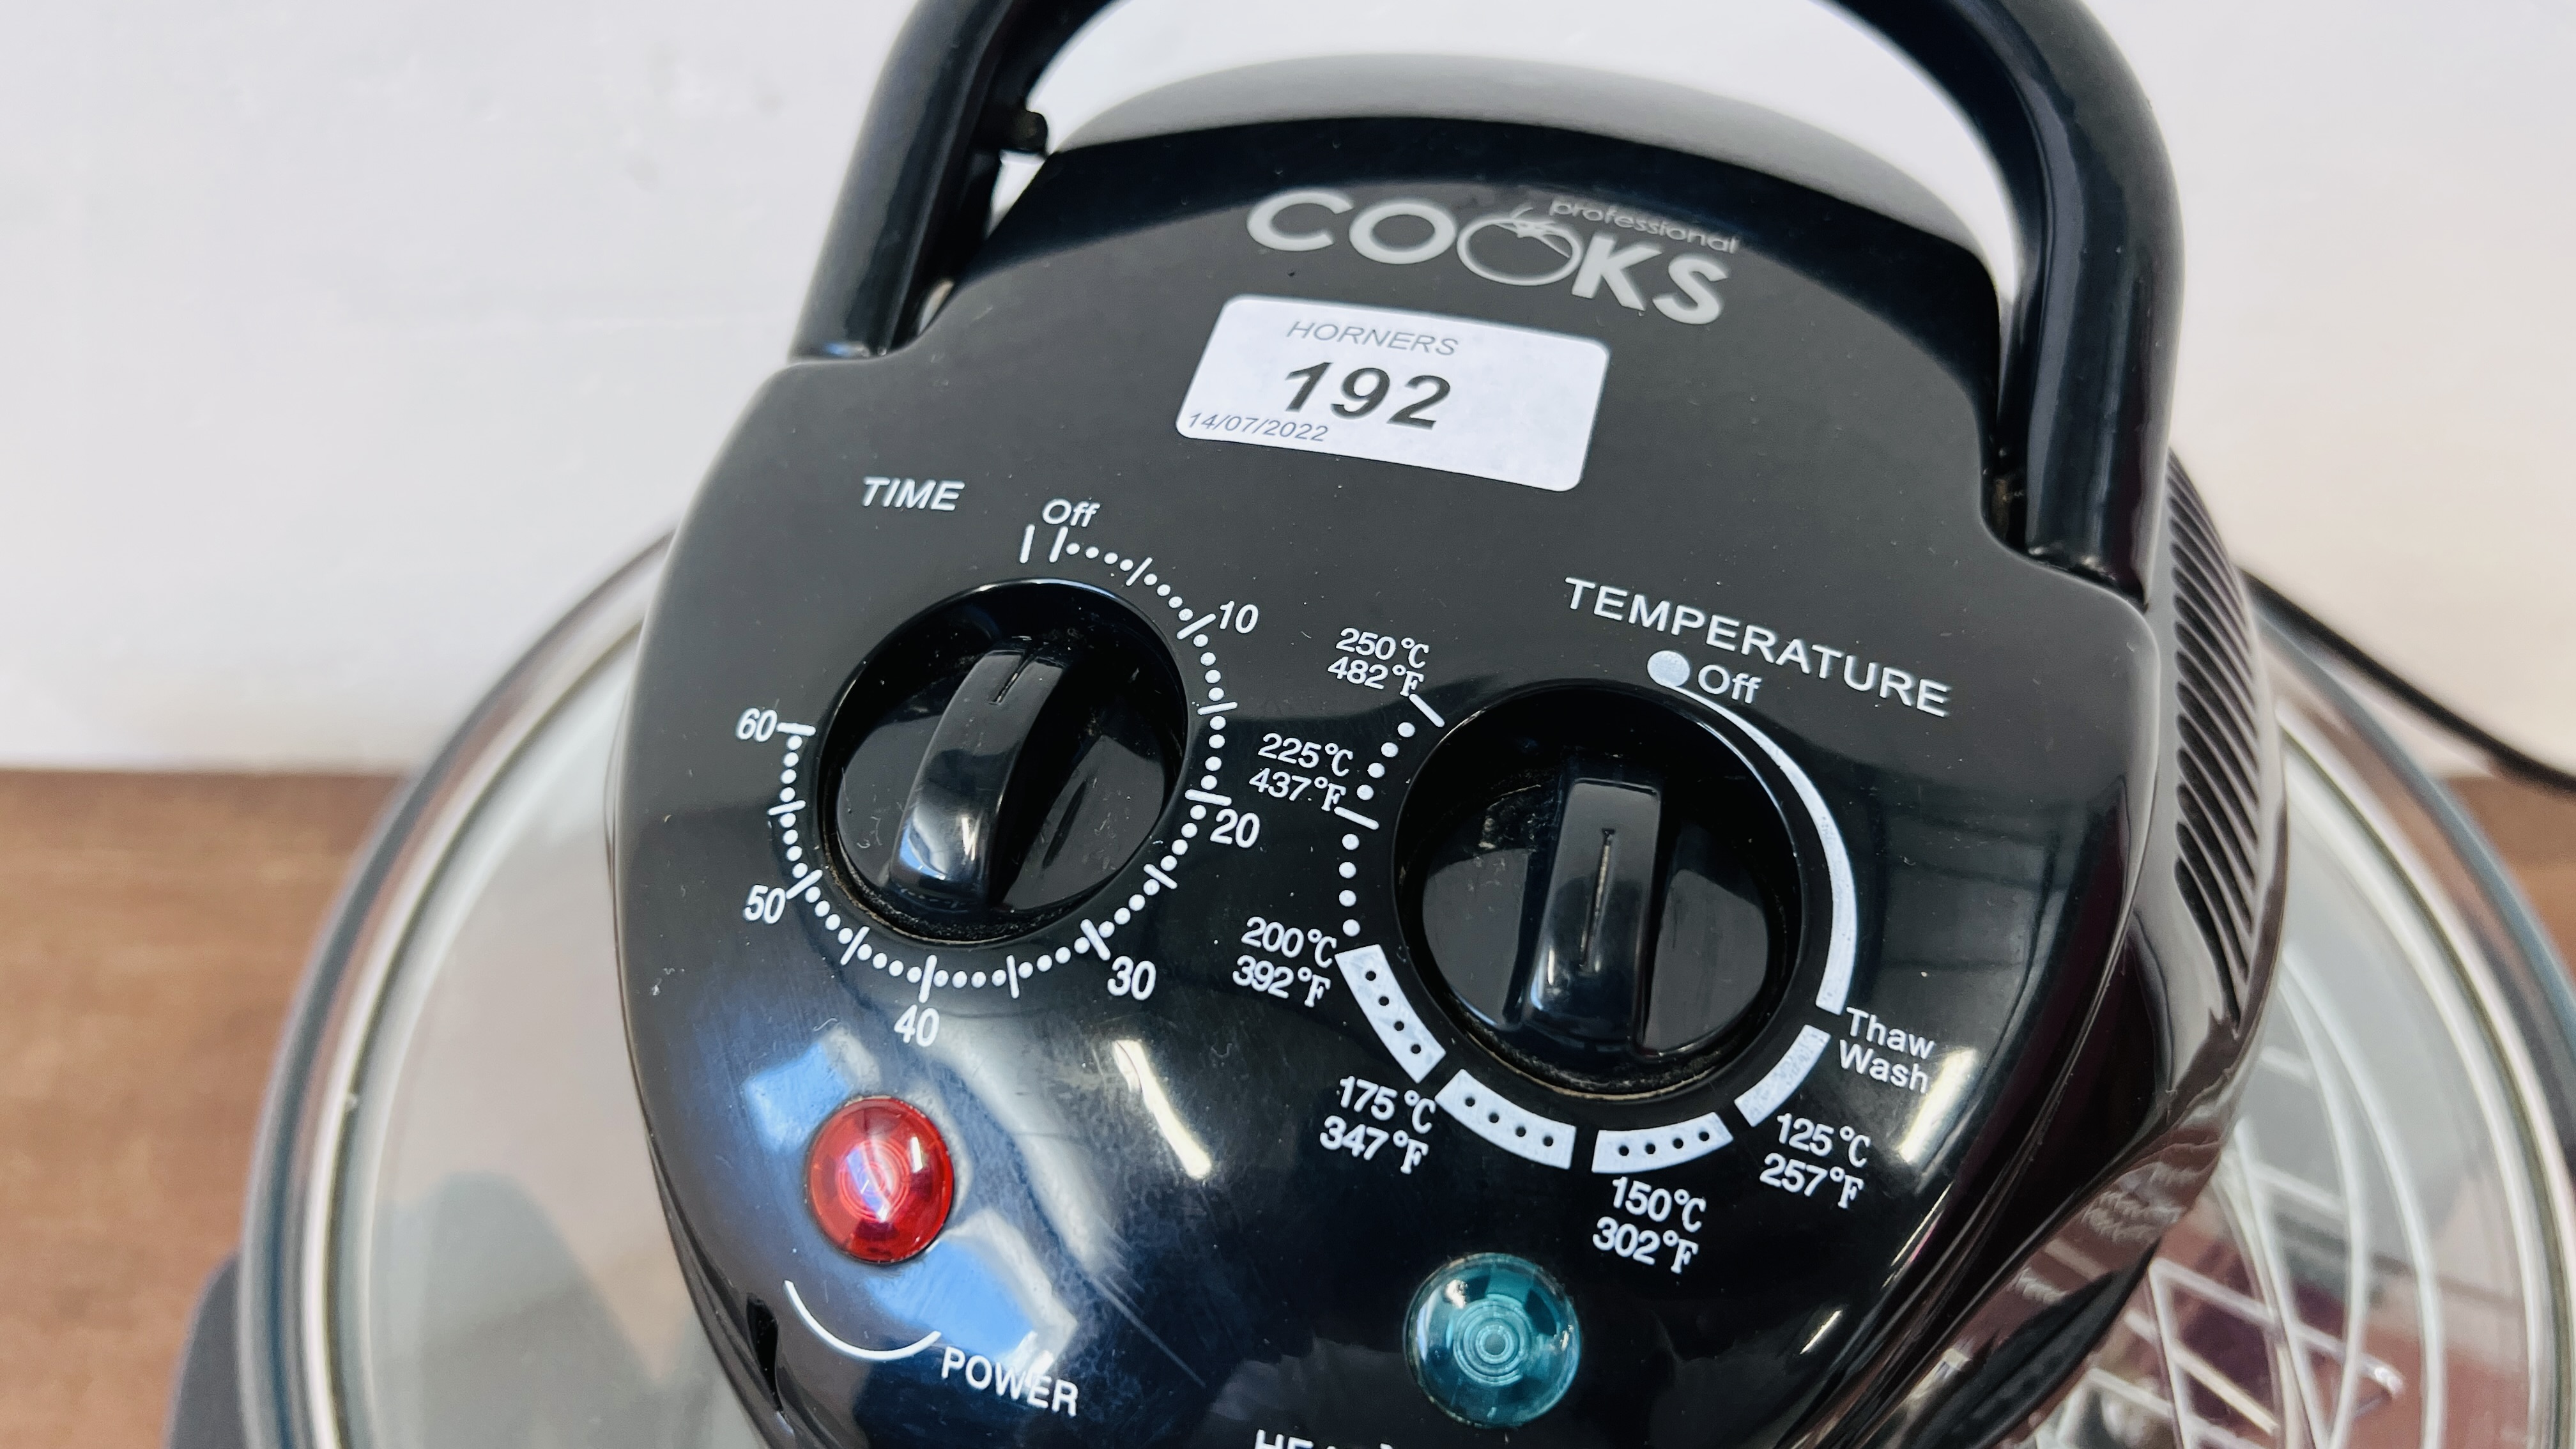 A PROFESSIONAL COOKS HALOGEN OVEN - SOLD AS SEEN. - Image 2 of 3